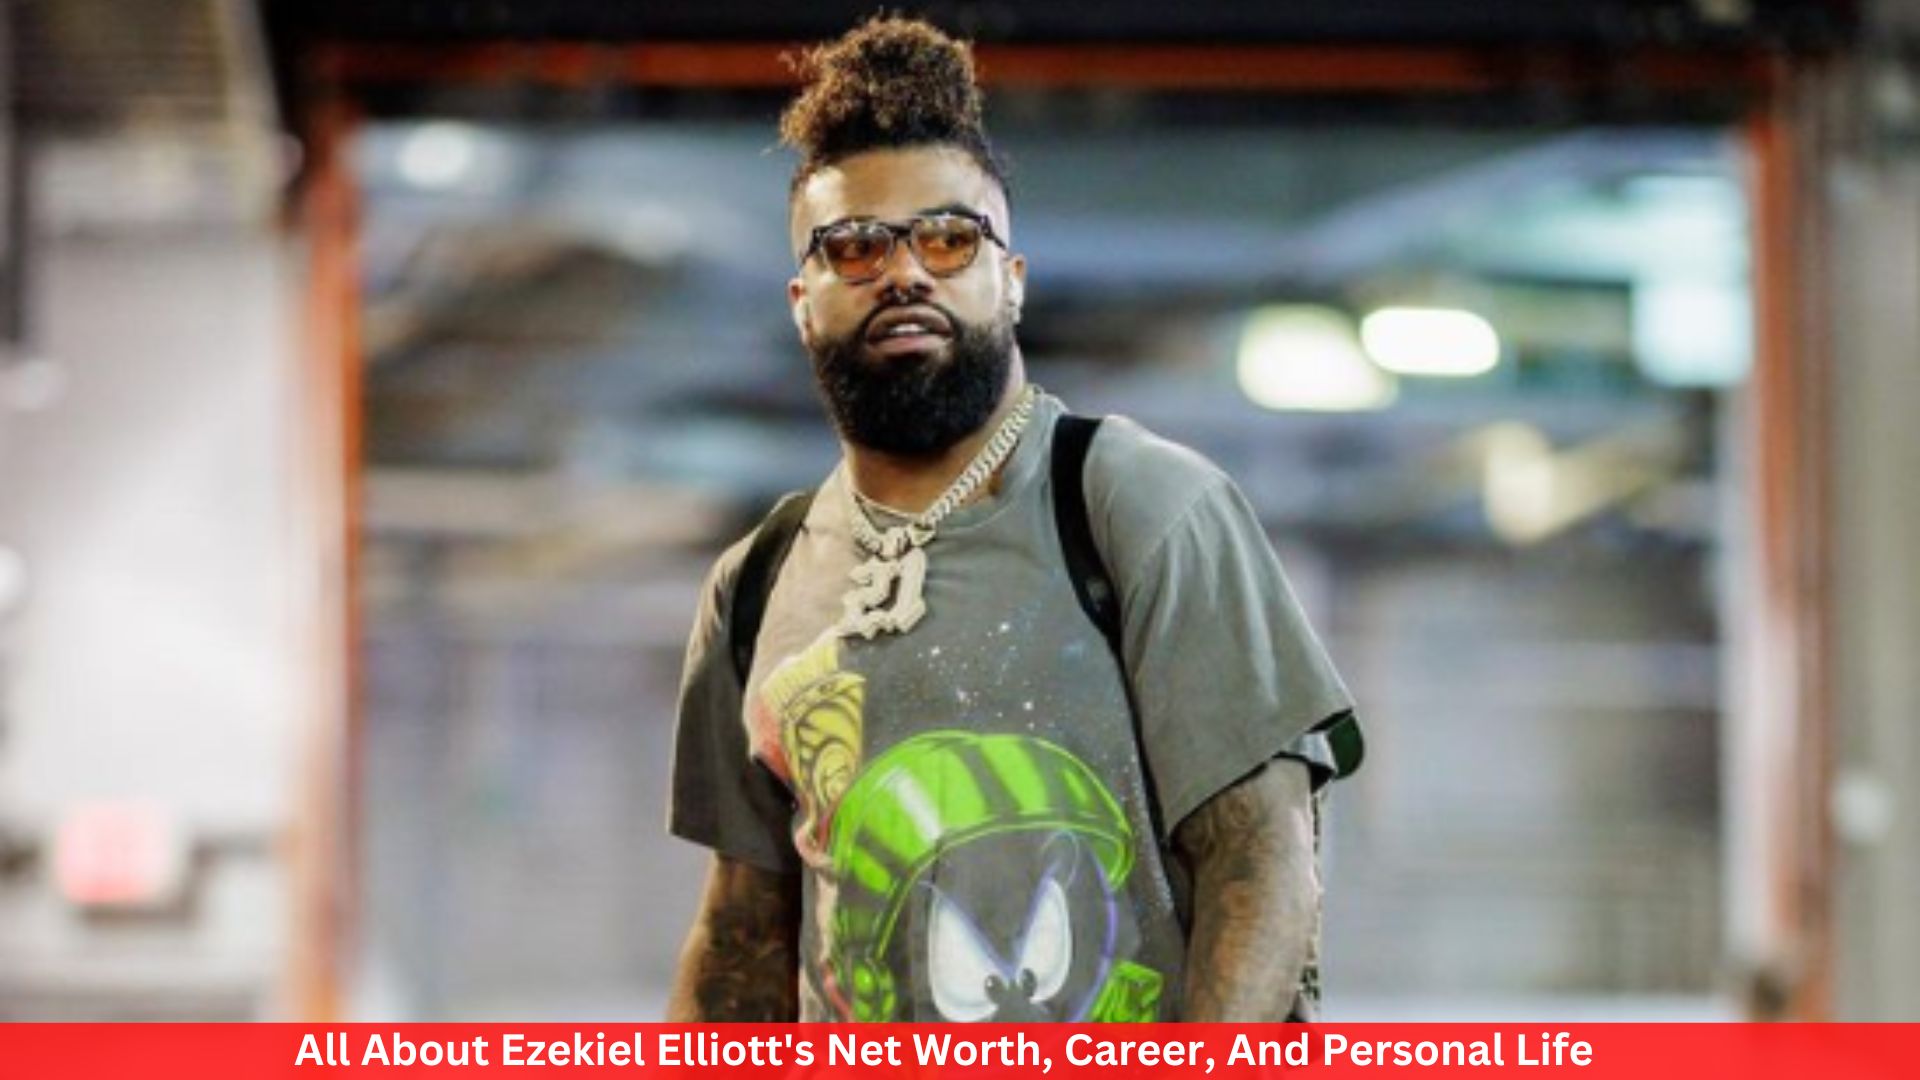 All About Ezekiel Elliott's Net Worth, Career, And Personal Life